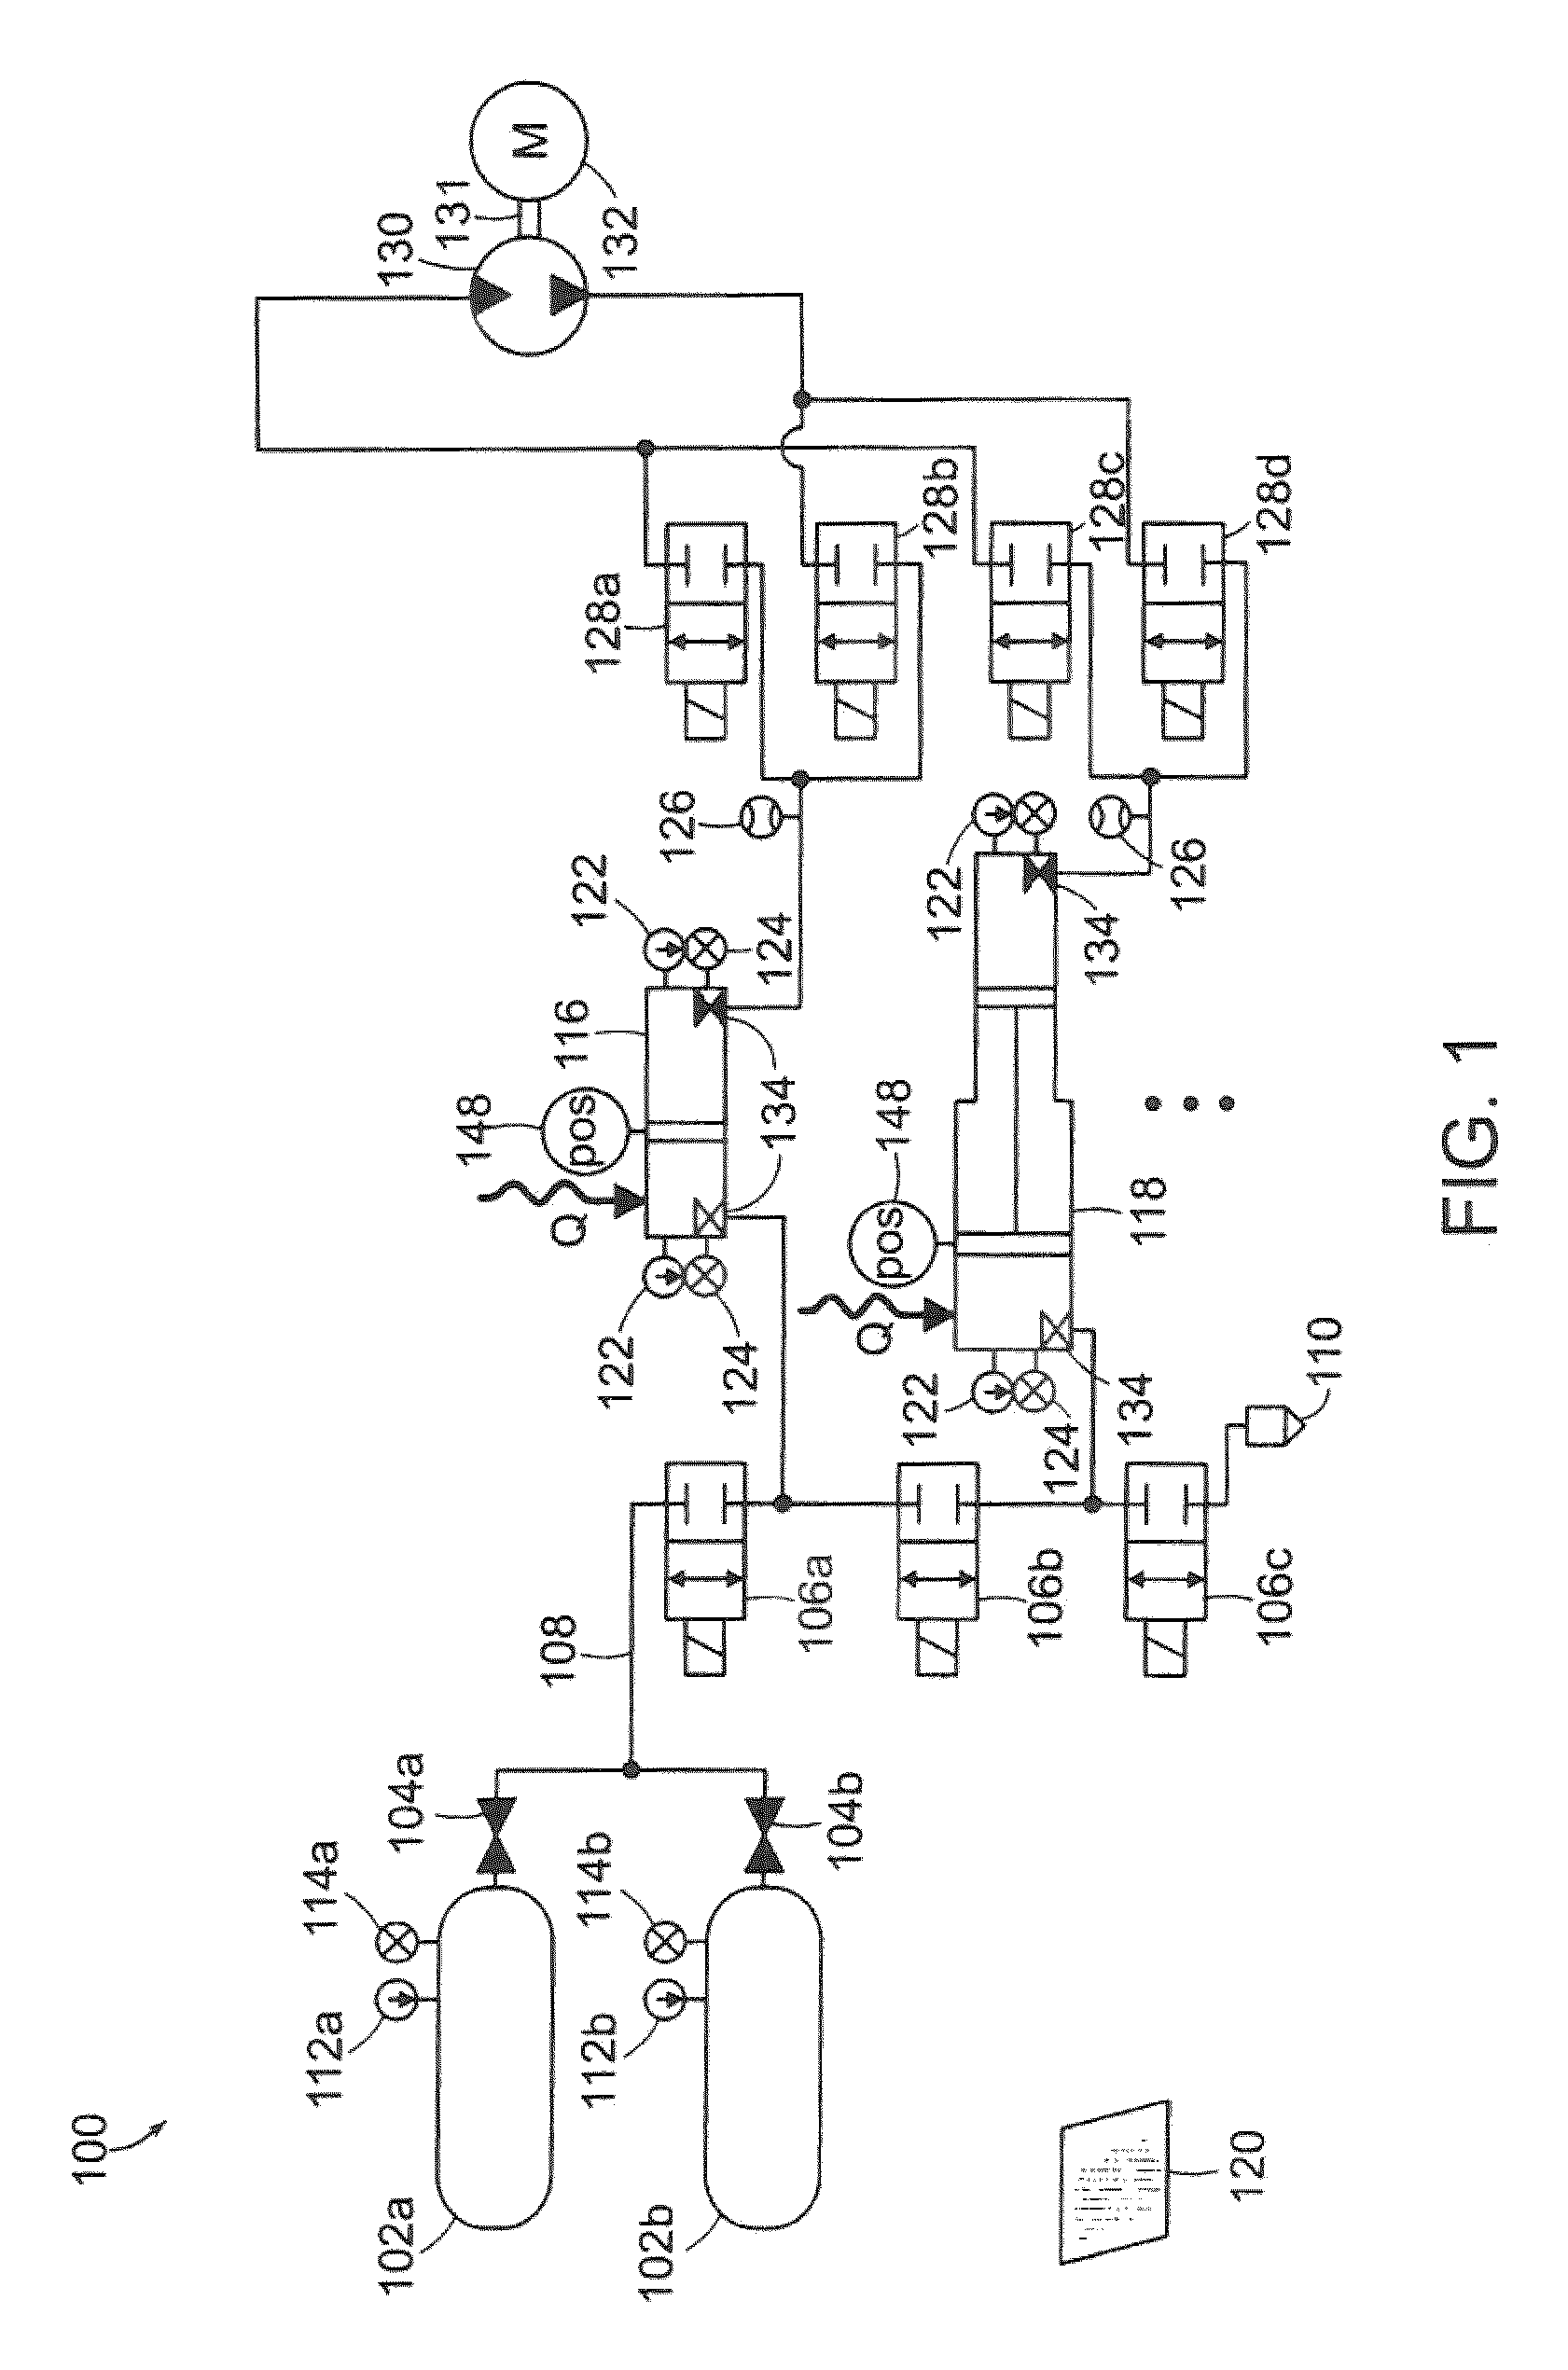 Systems and methods for energy storage and recovery using gas expansion and compression